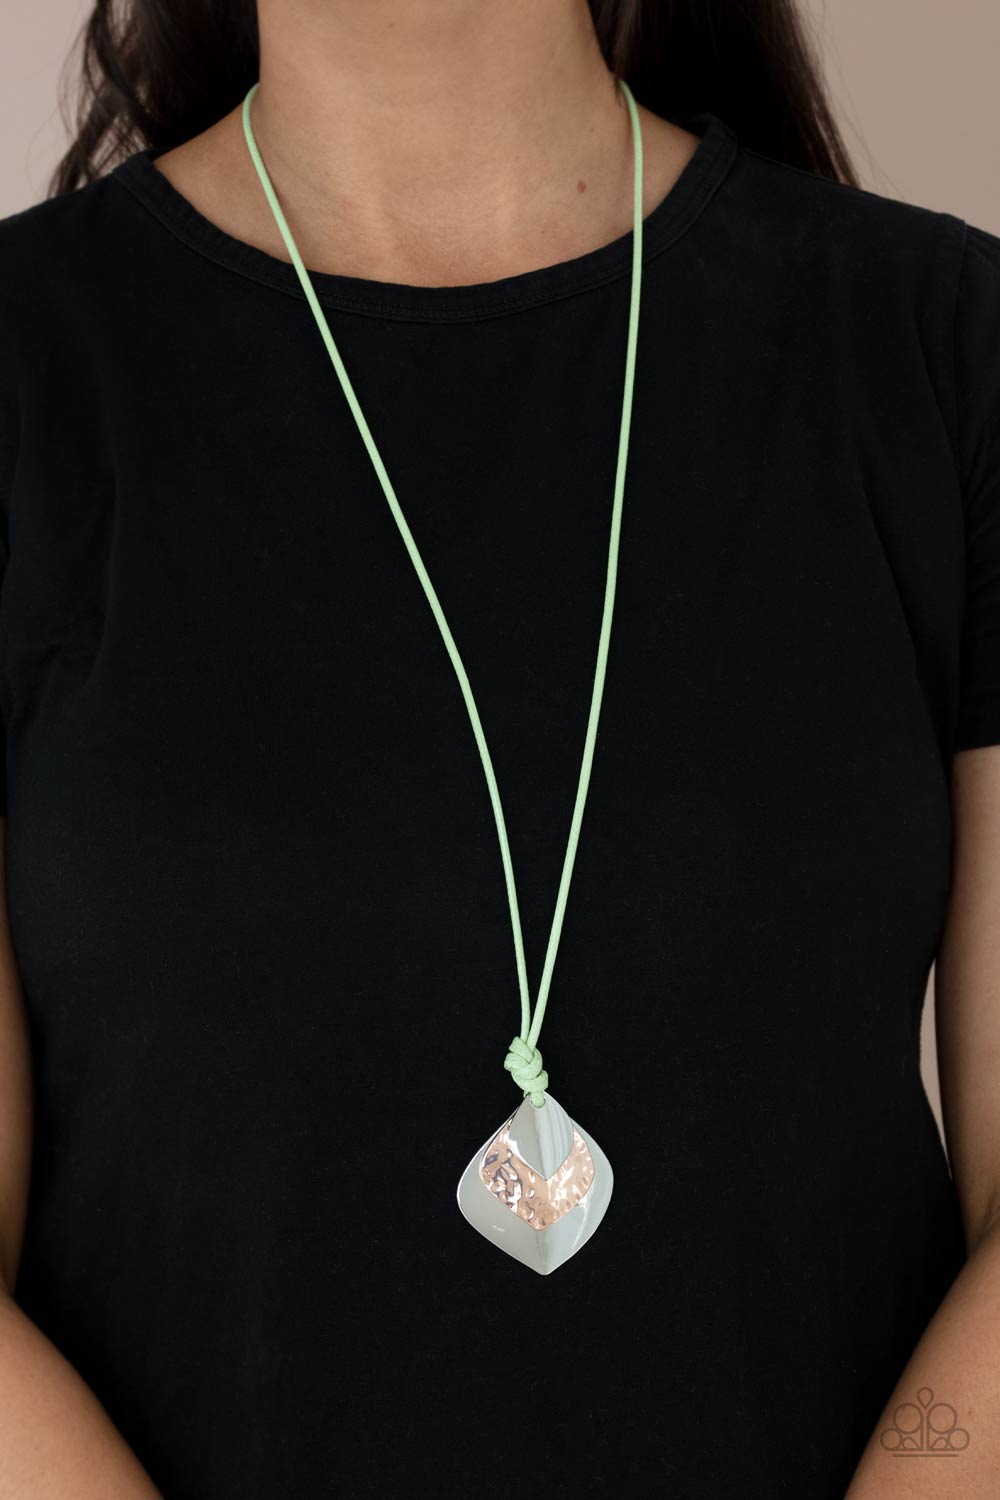 PRE-ORDER - Paparazzi Face The ARTIFACTS - Green - Necklace & Earrings - $5 Jewelry with Ashley Swint